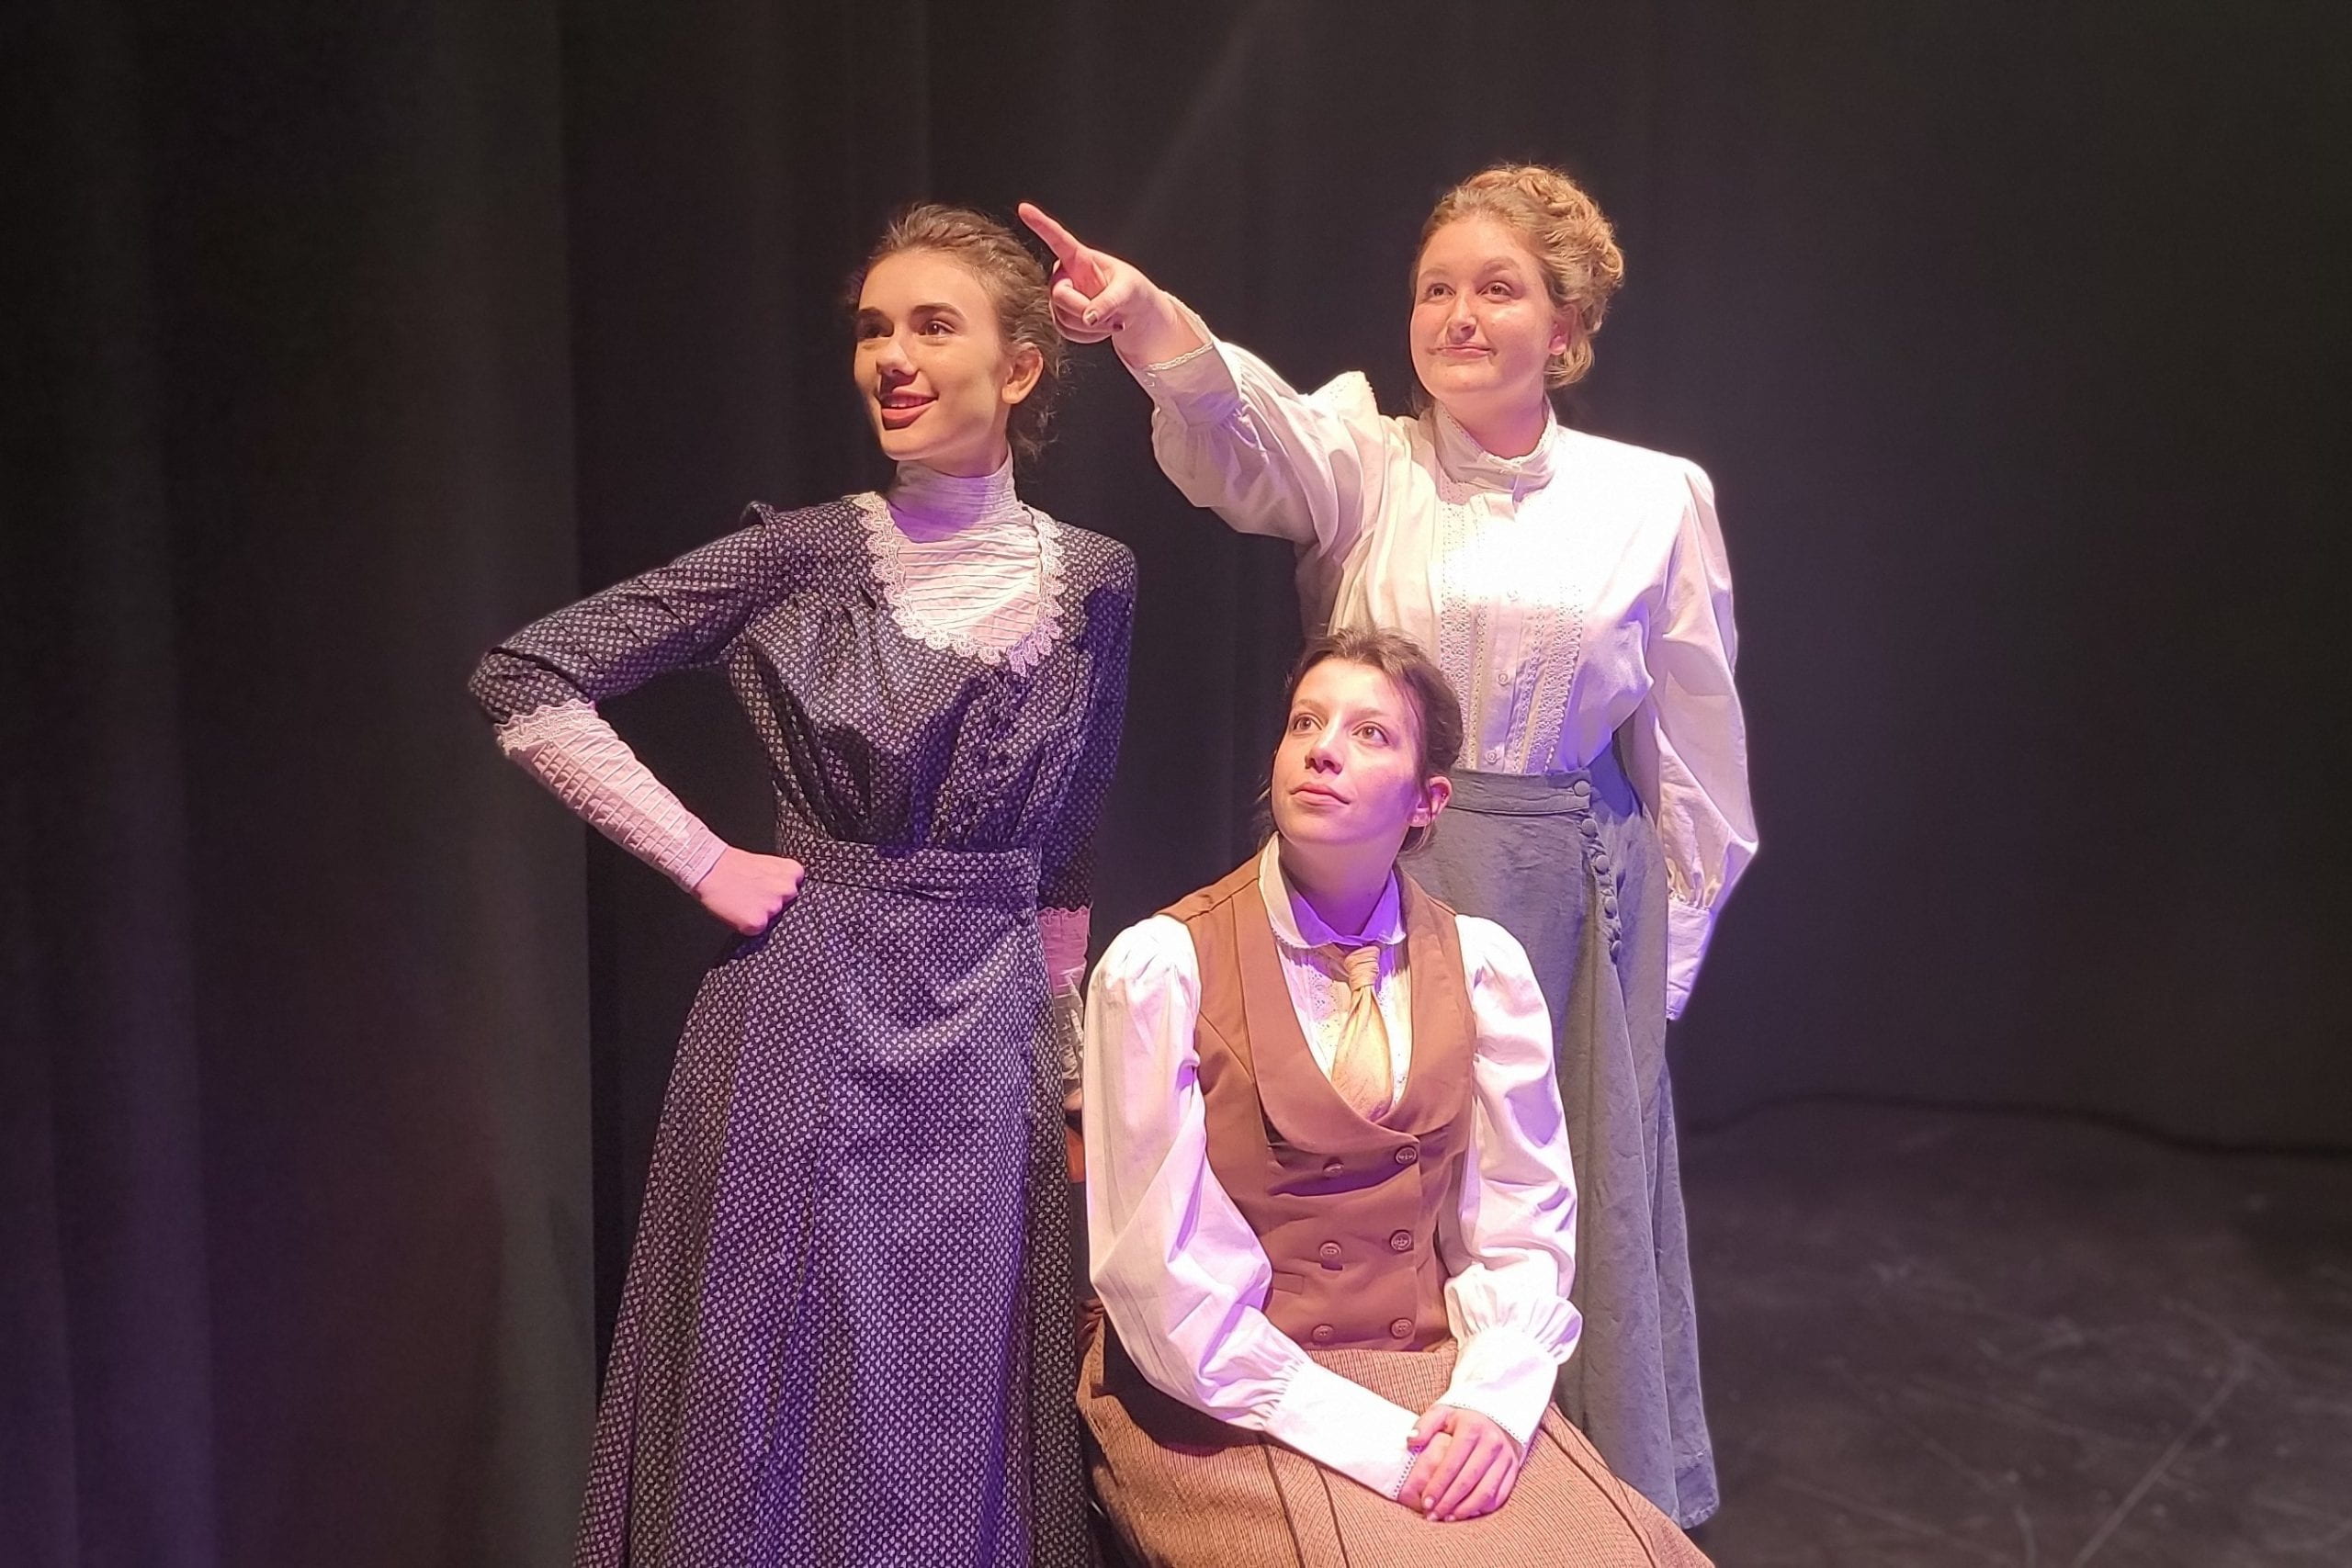 (From left to right) Marta Minarik as Williamina Fleming, Hailey Zitzer as Annie Cannon and Gabriella Johnson as Henrietta Leavitt in the Department of Theatre, Film, and Media Arts’ production of "Silent Sky." Credit: J. Briggs Cormier